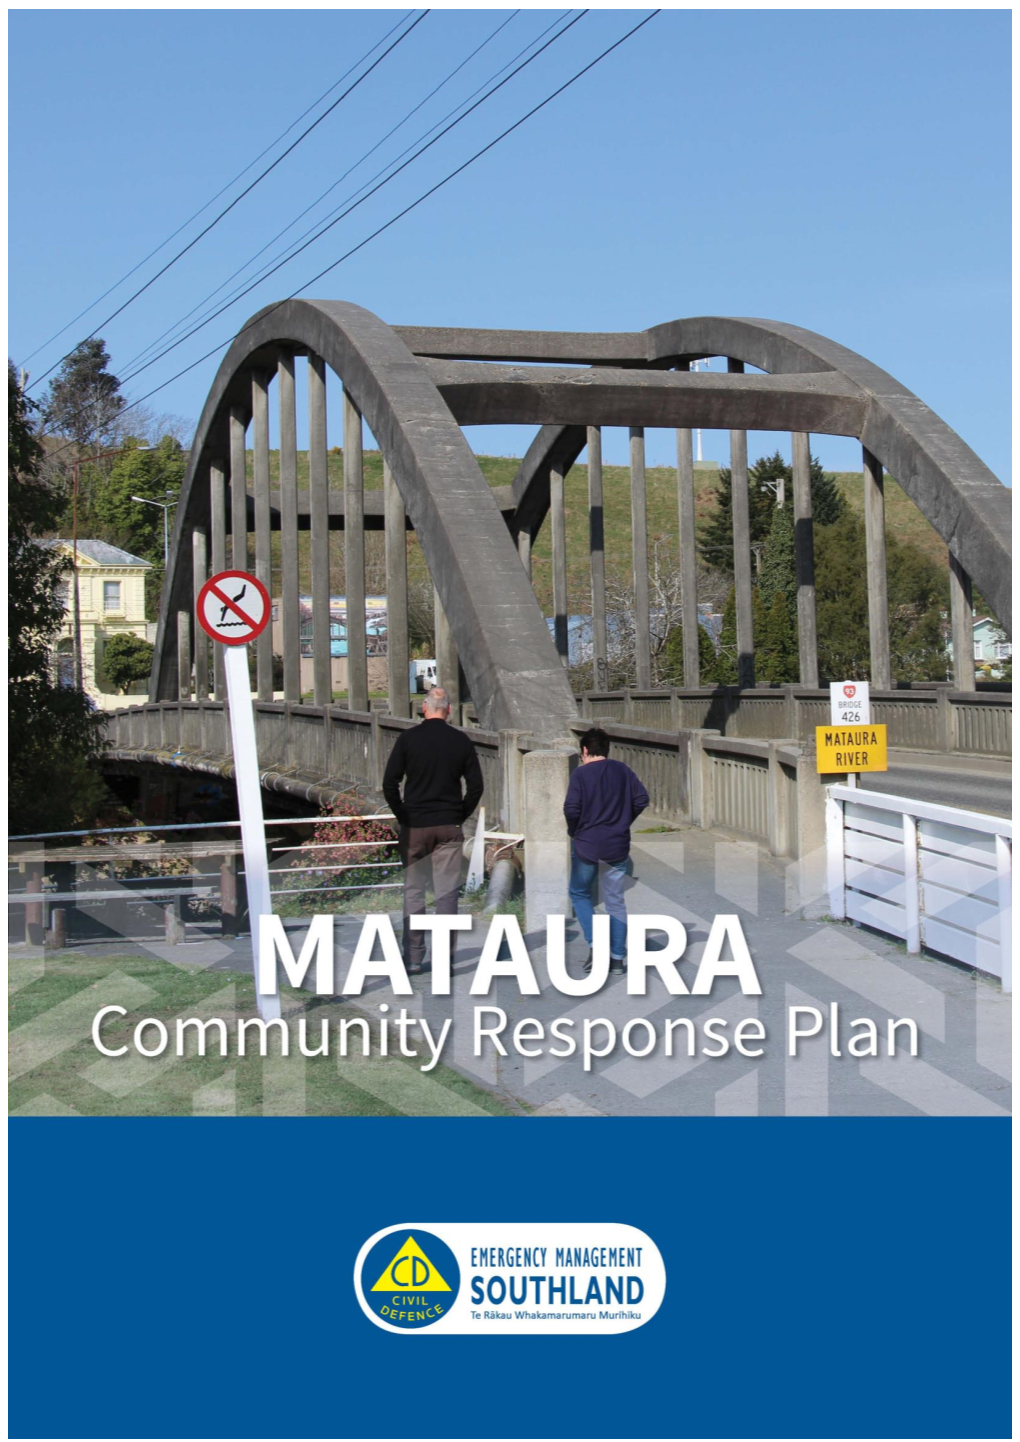 Mataura Community Response Plan 2019 Find More Information on How You Can Be Prepared for an Emergency